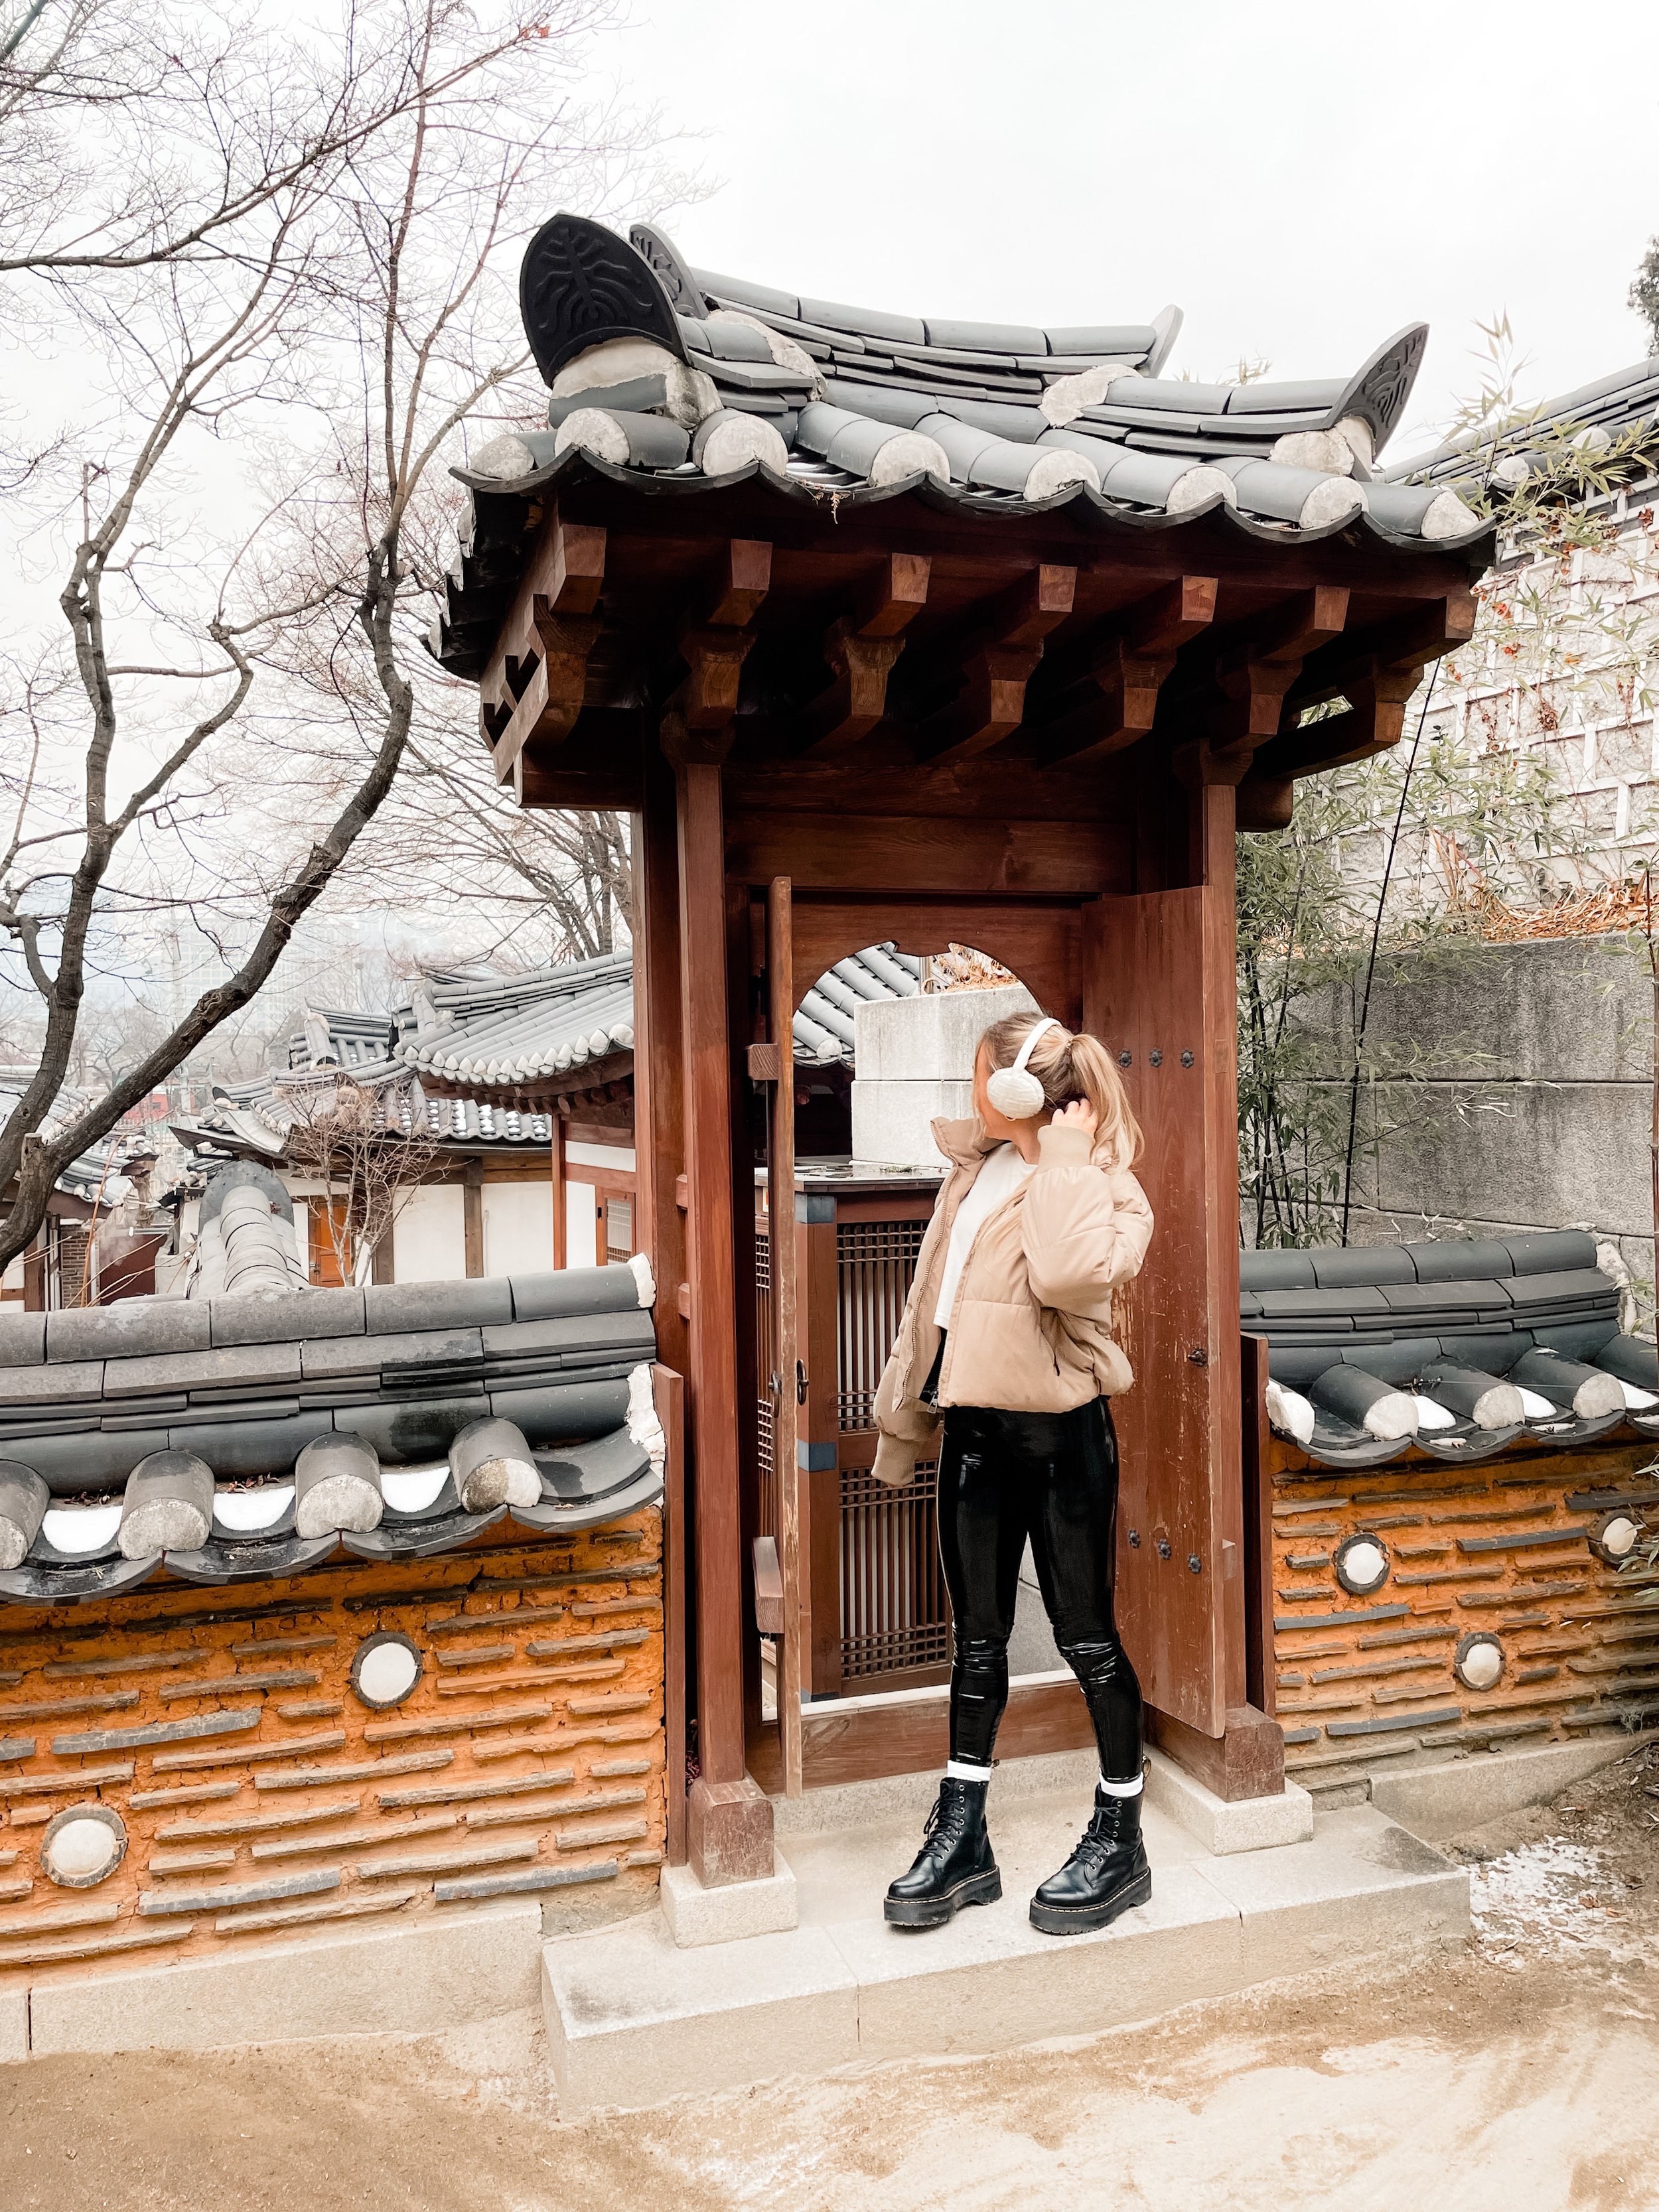 Best Things to Do In Seoul